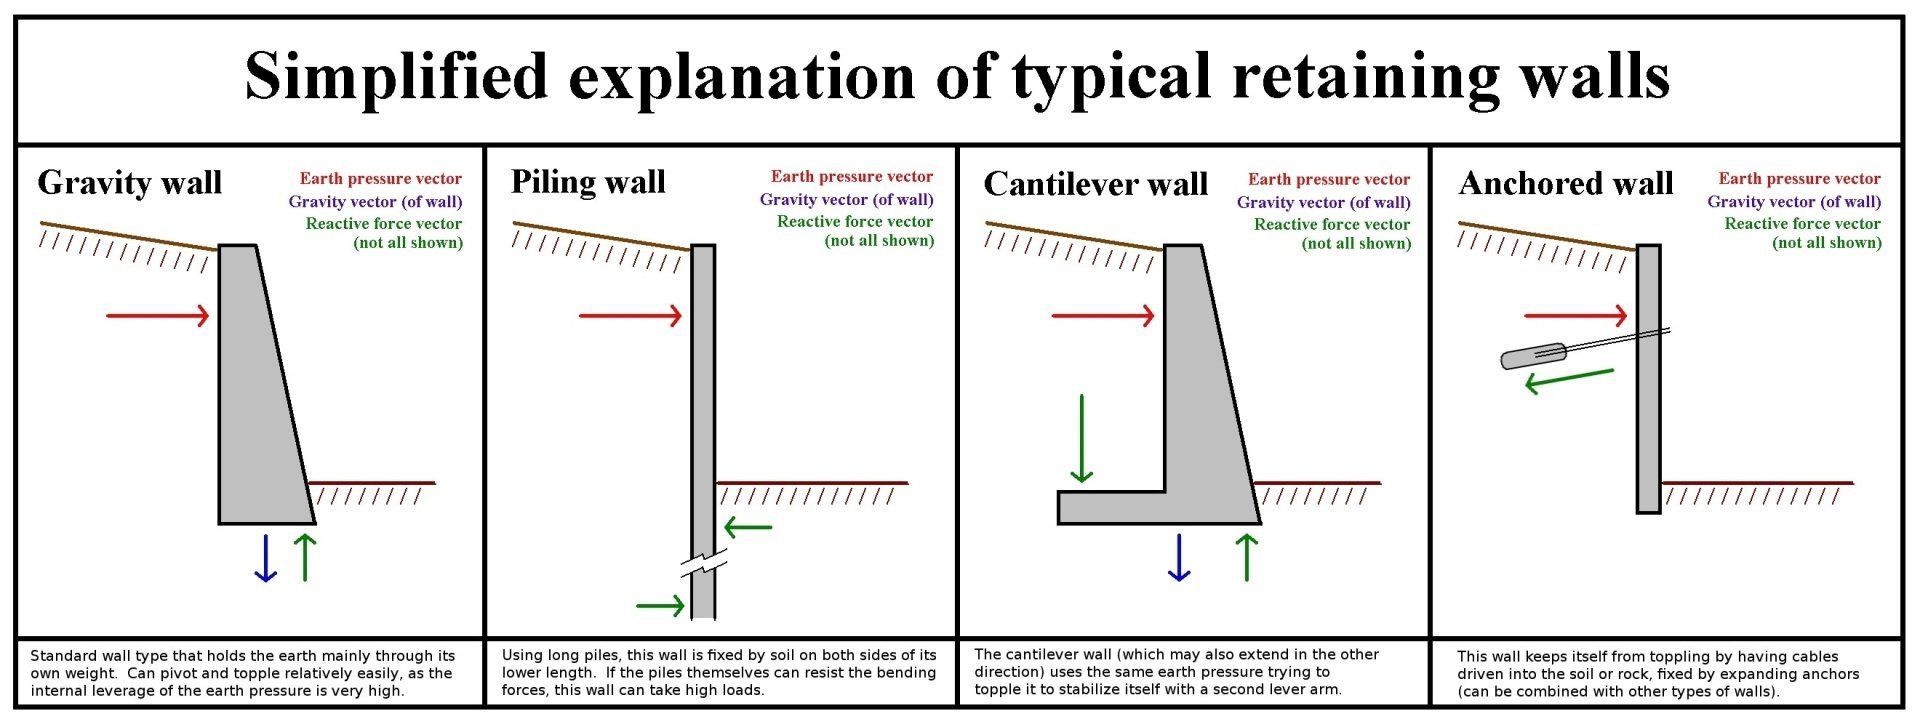 a diagram of the 4 most common types of retaining walls with a simplified explanation of each